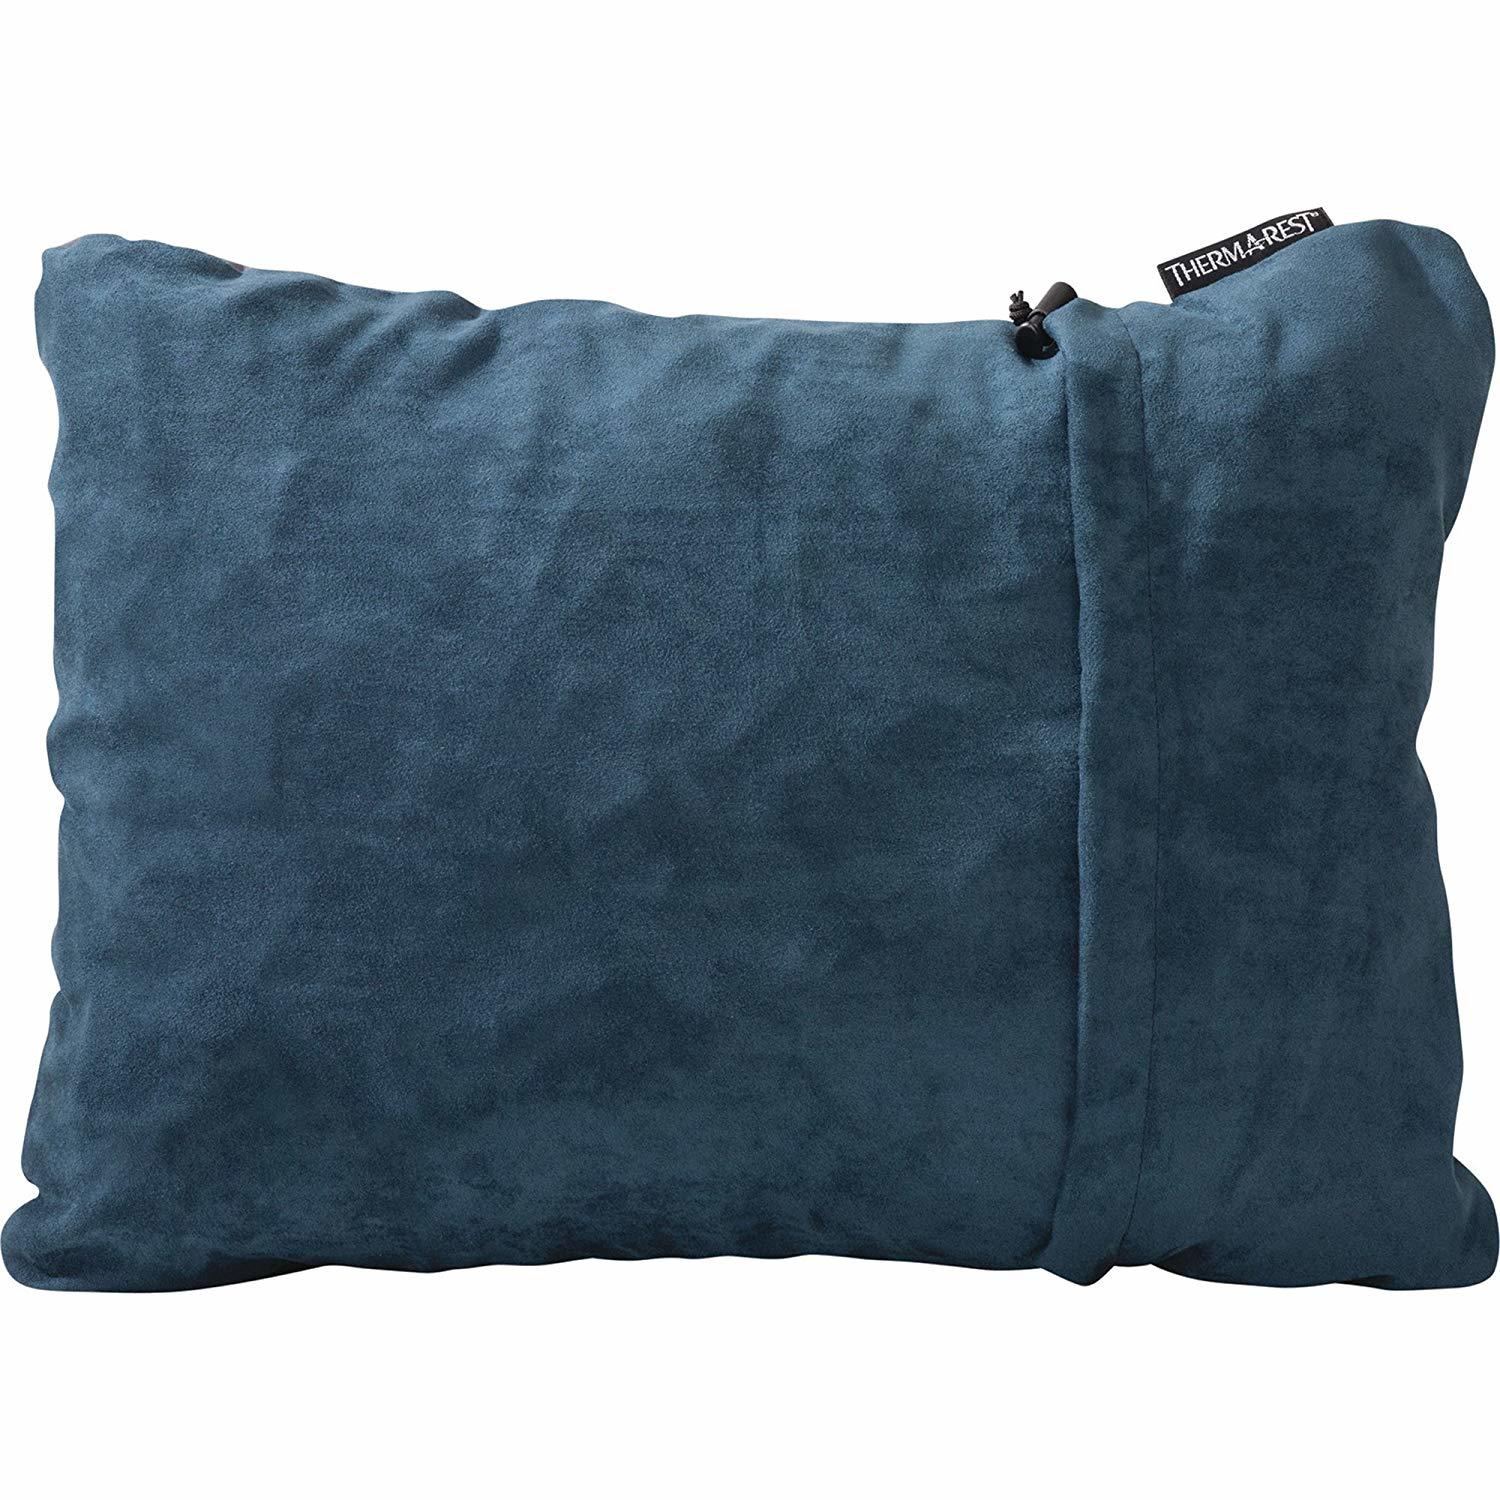 Thermarest Compressible Pillow Review